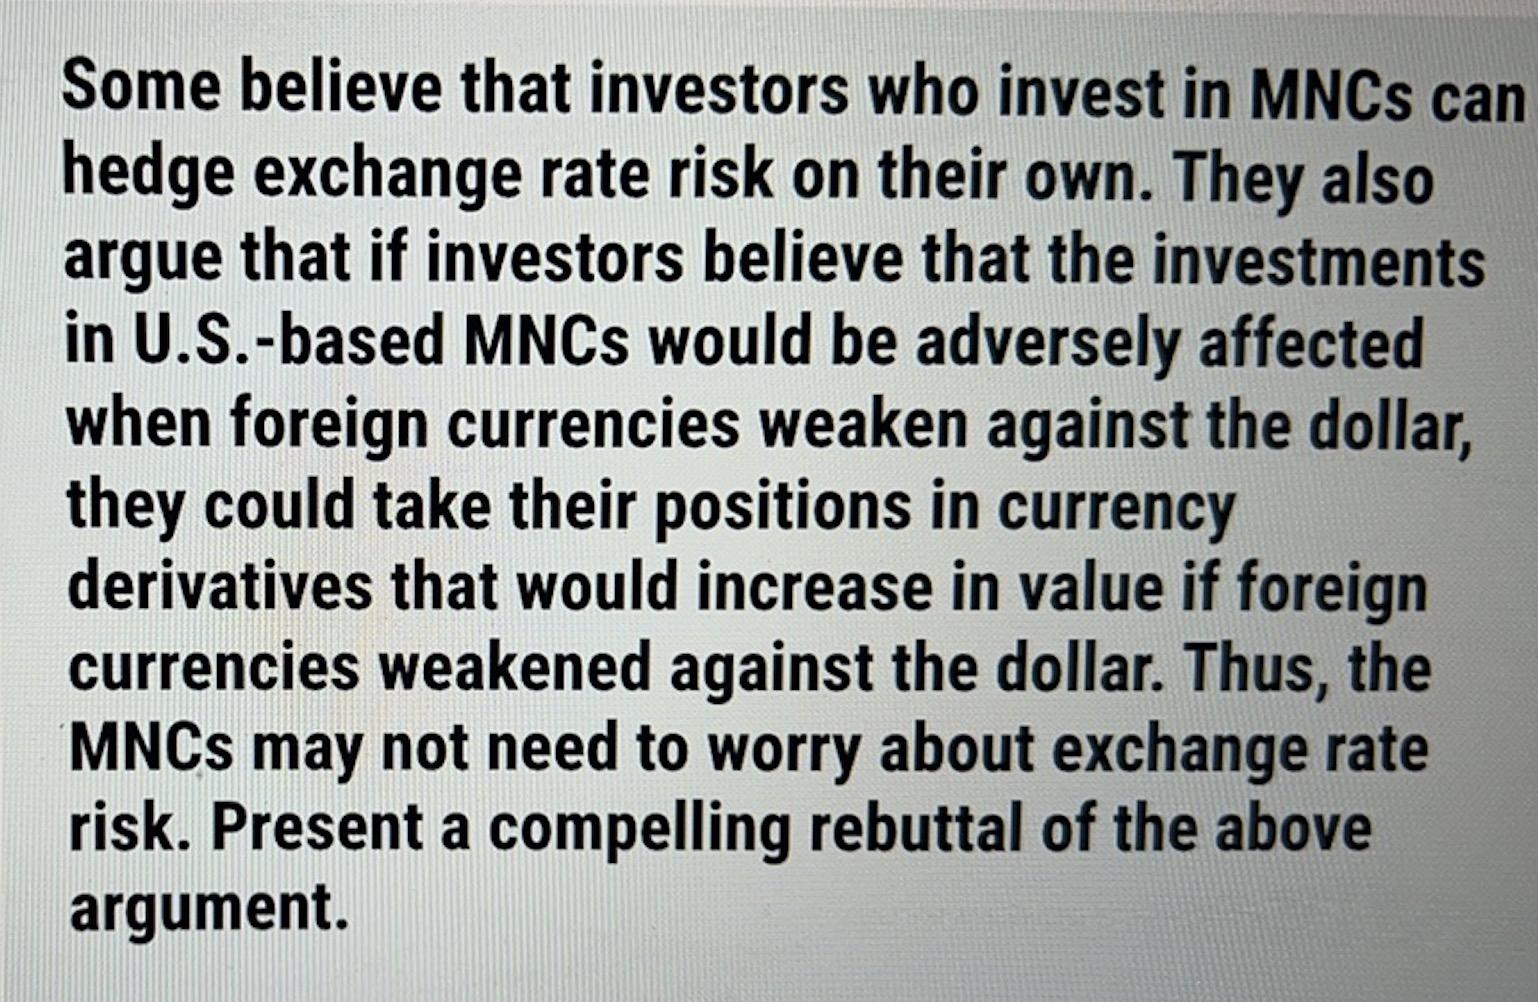 Some believe that investors who invest in MNCs can hedge exchange rate risk on their own. They also argue